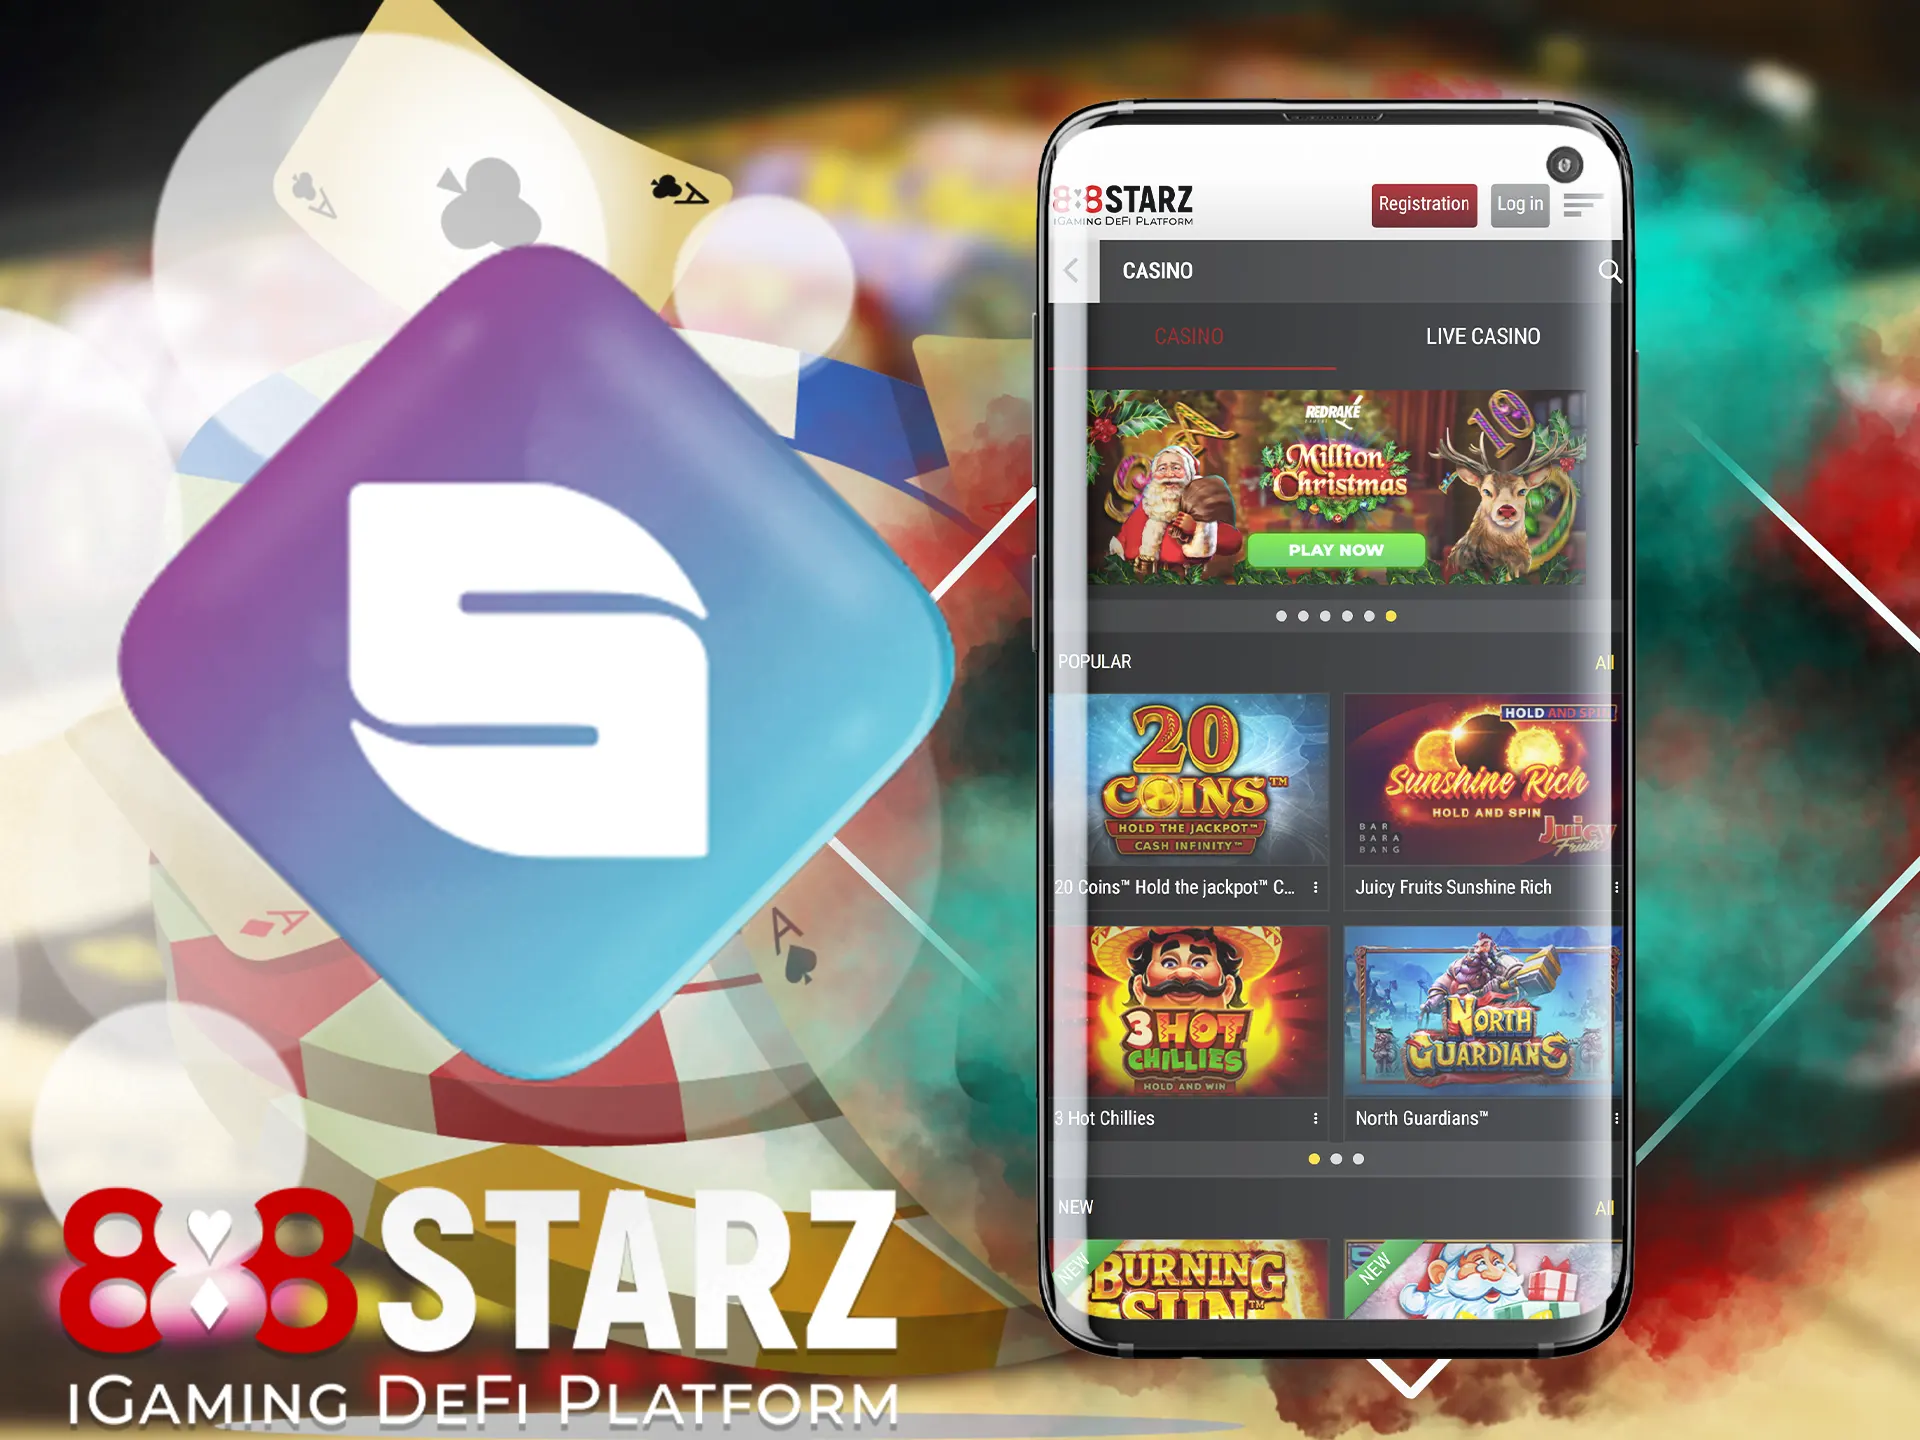 Over 100 games from the world famous provider at 888starz await you.